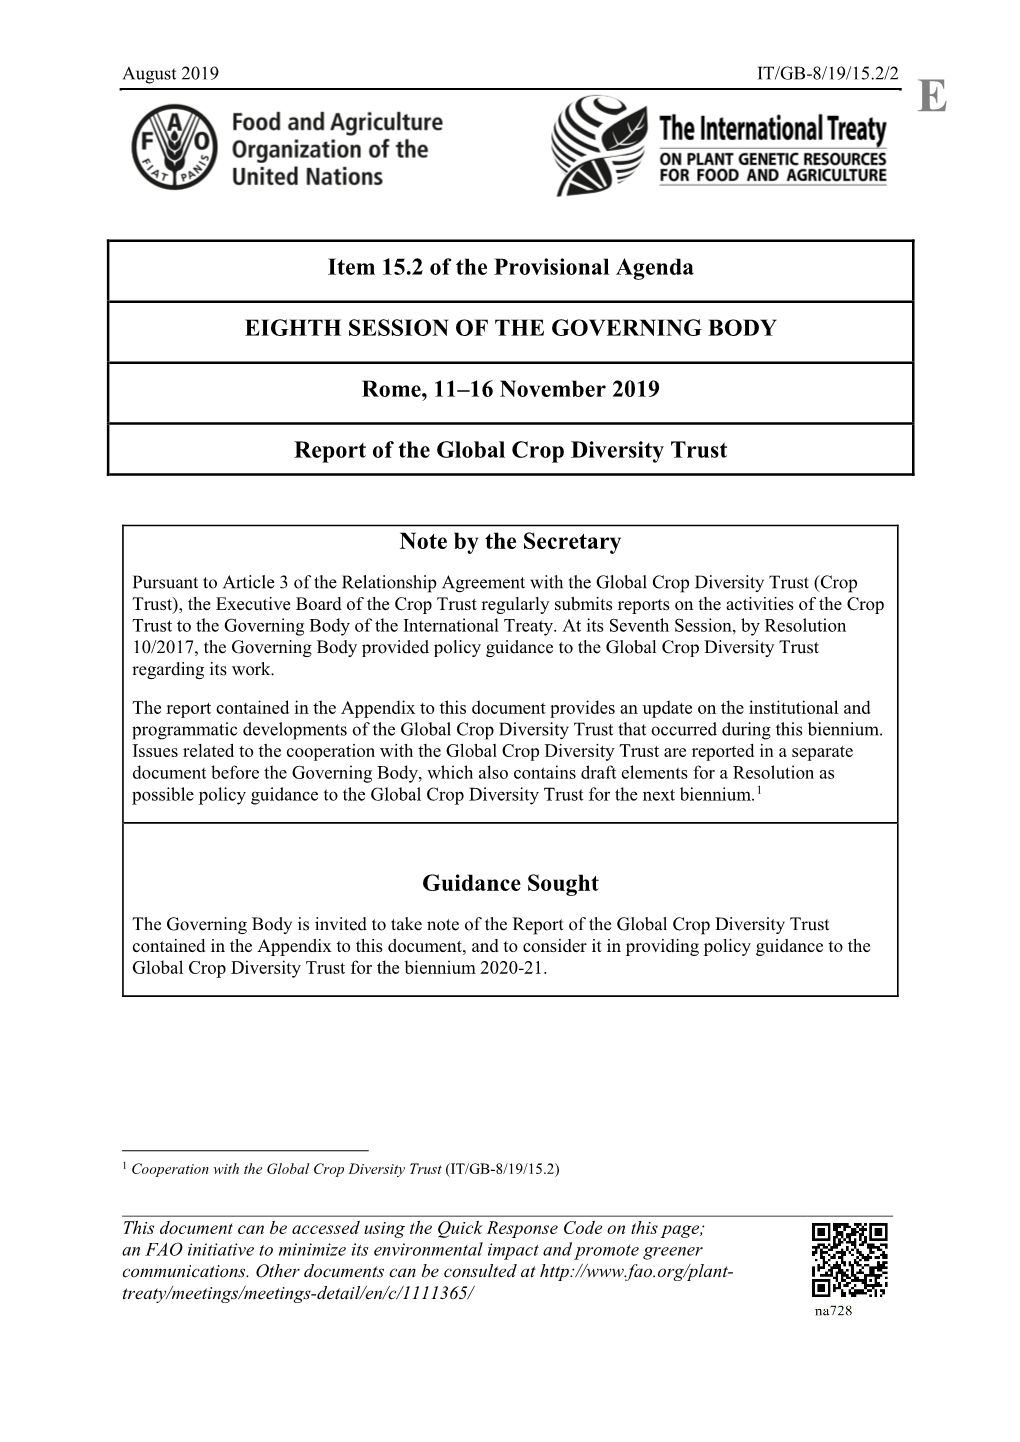 Item 15.2 of the Provisional Agenda EIGHTH SESSION of THE